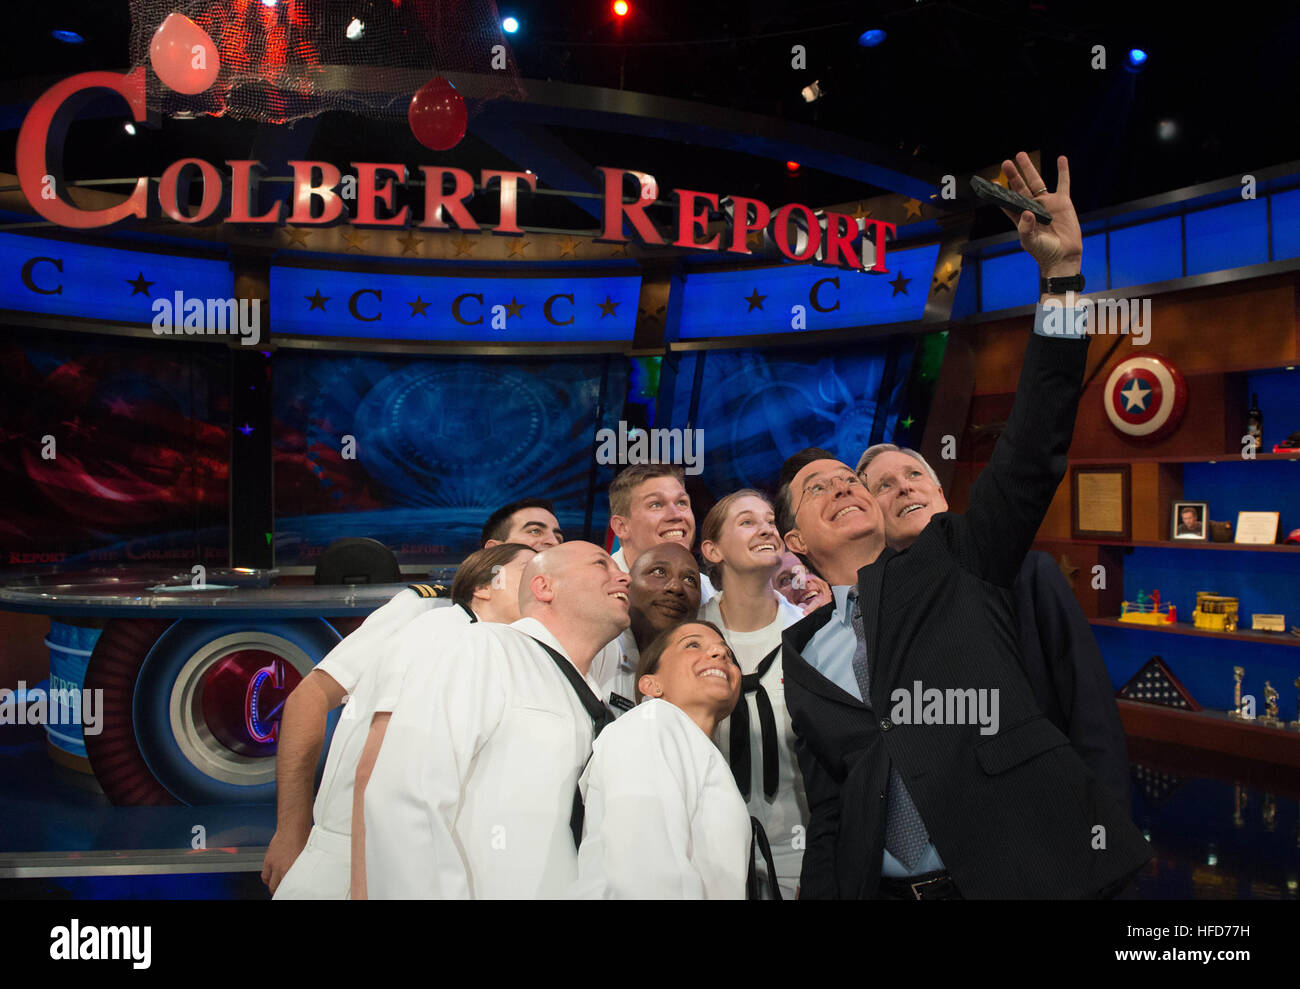 NEW YORK (May 22, 2014) Secretary of the Navy (SECNAV) Ray Mabus and Stephen Colbert, host of the late night television show “The Colbert Report” take a selfie photograph with Sailors during Fleet Week 2014 in New York City. (U.S. Navy photo by Mass Communication Specialist 1st Class Arif Patani/Released) 140522-N-PM781-006 Join the conversation http://www.navy.mil/viewGallery.asp http://www.facebook.com/USNavy http://www.twitter.com/USNavy http://navylive.dodlive.mil http://pinterest.com https://plus.google.com Stephen Colbert takes a selfie with a Sailor. (14066471618) Stock Photo